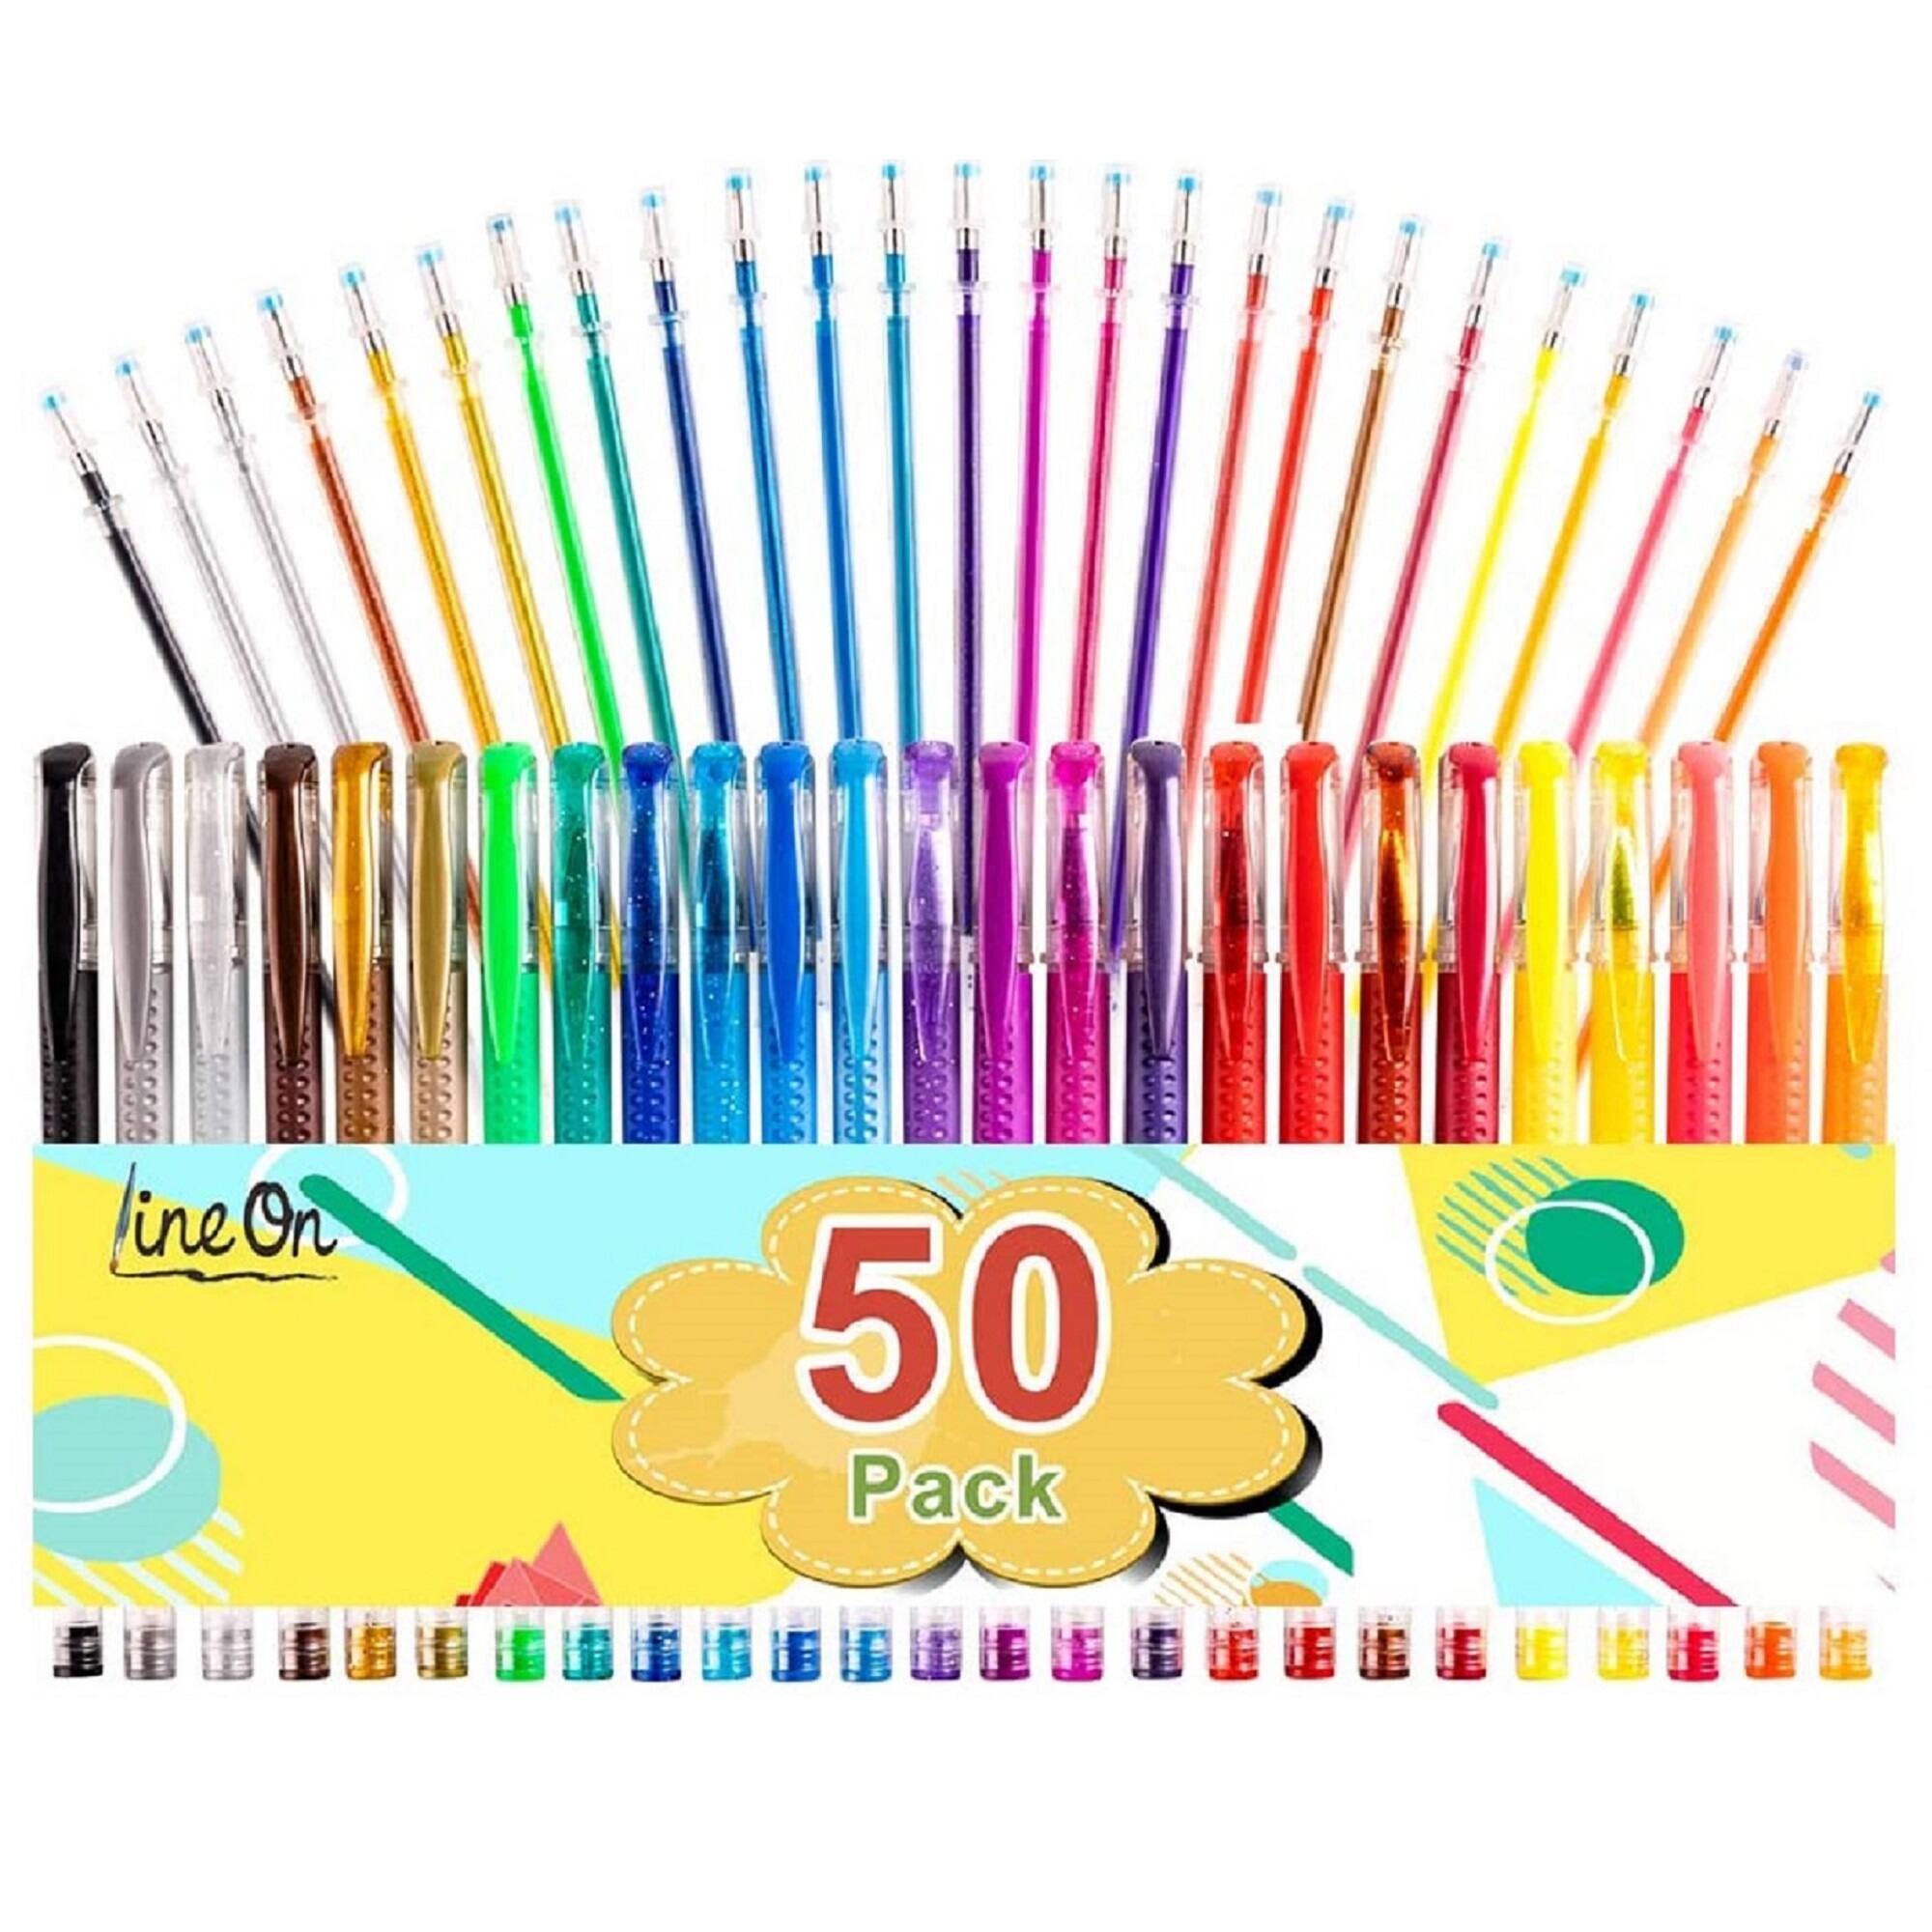 Lineon 25 Colors Gel Pens with 25 Refills $5.09 + Free shipping w/ Prime or $25+